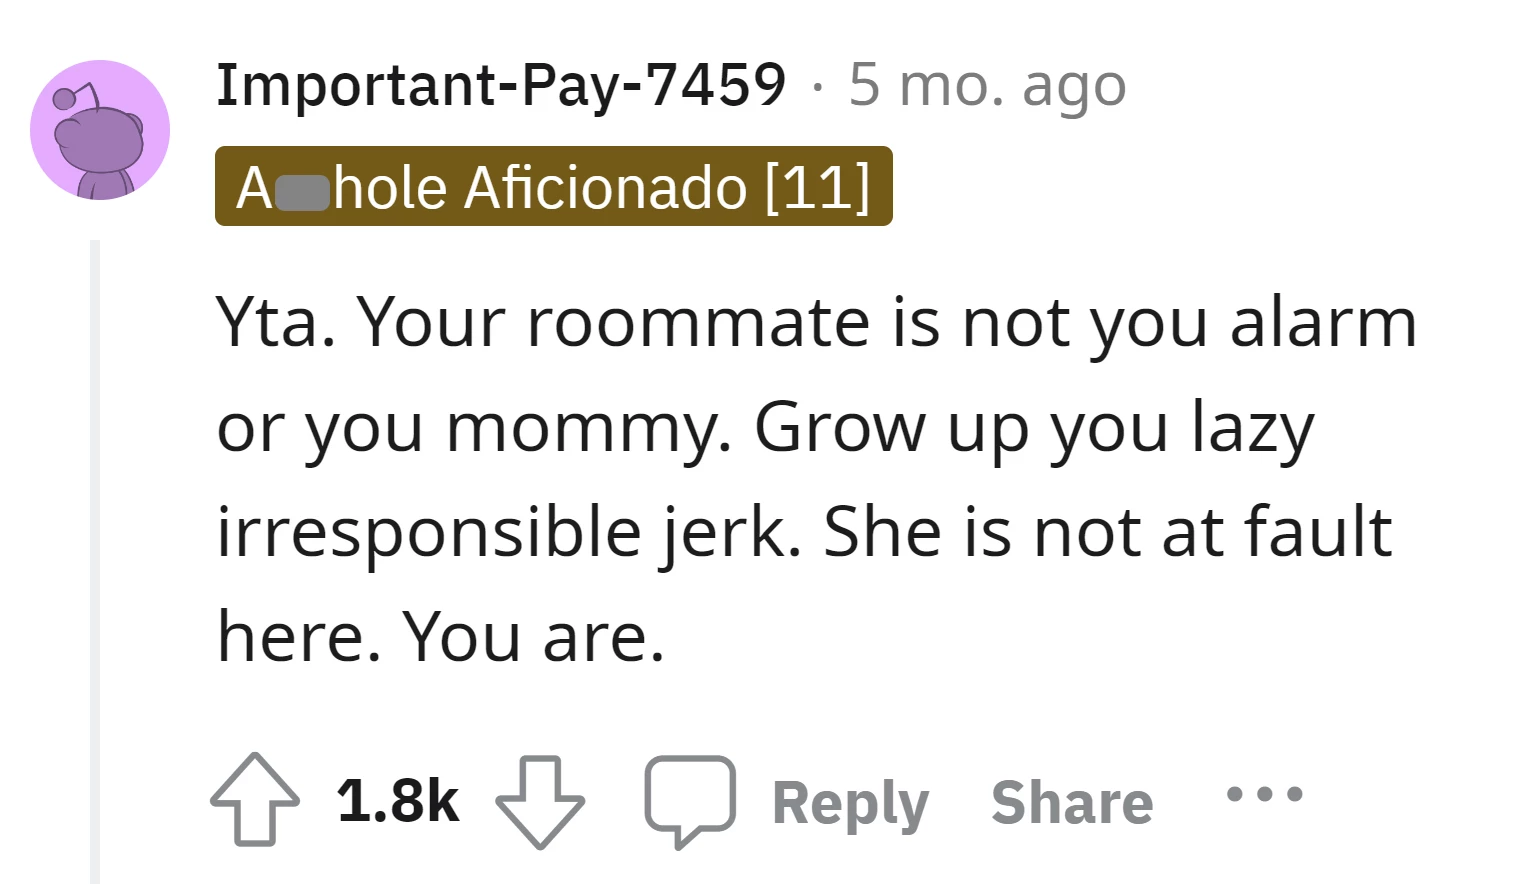 The OP is at fault for relying on her roommate as an alarm